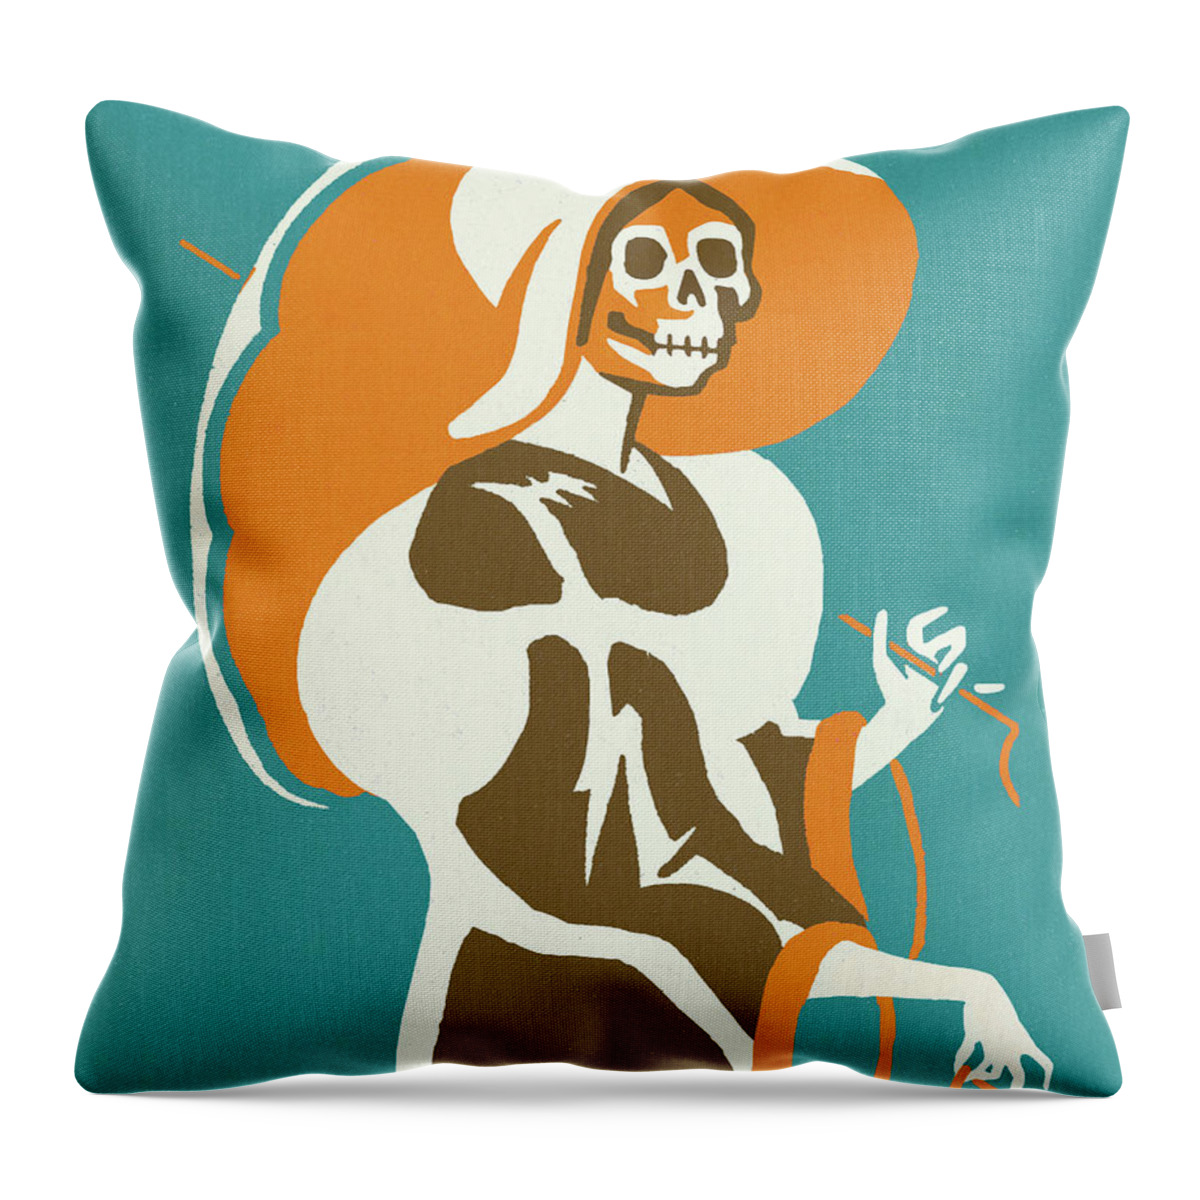 Accessories Throw Pillow featuring the drawing Skeleton Woman With Umbrella by CSA Images